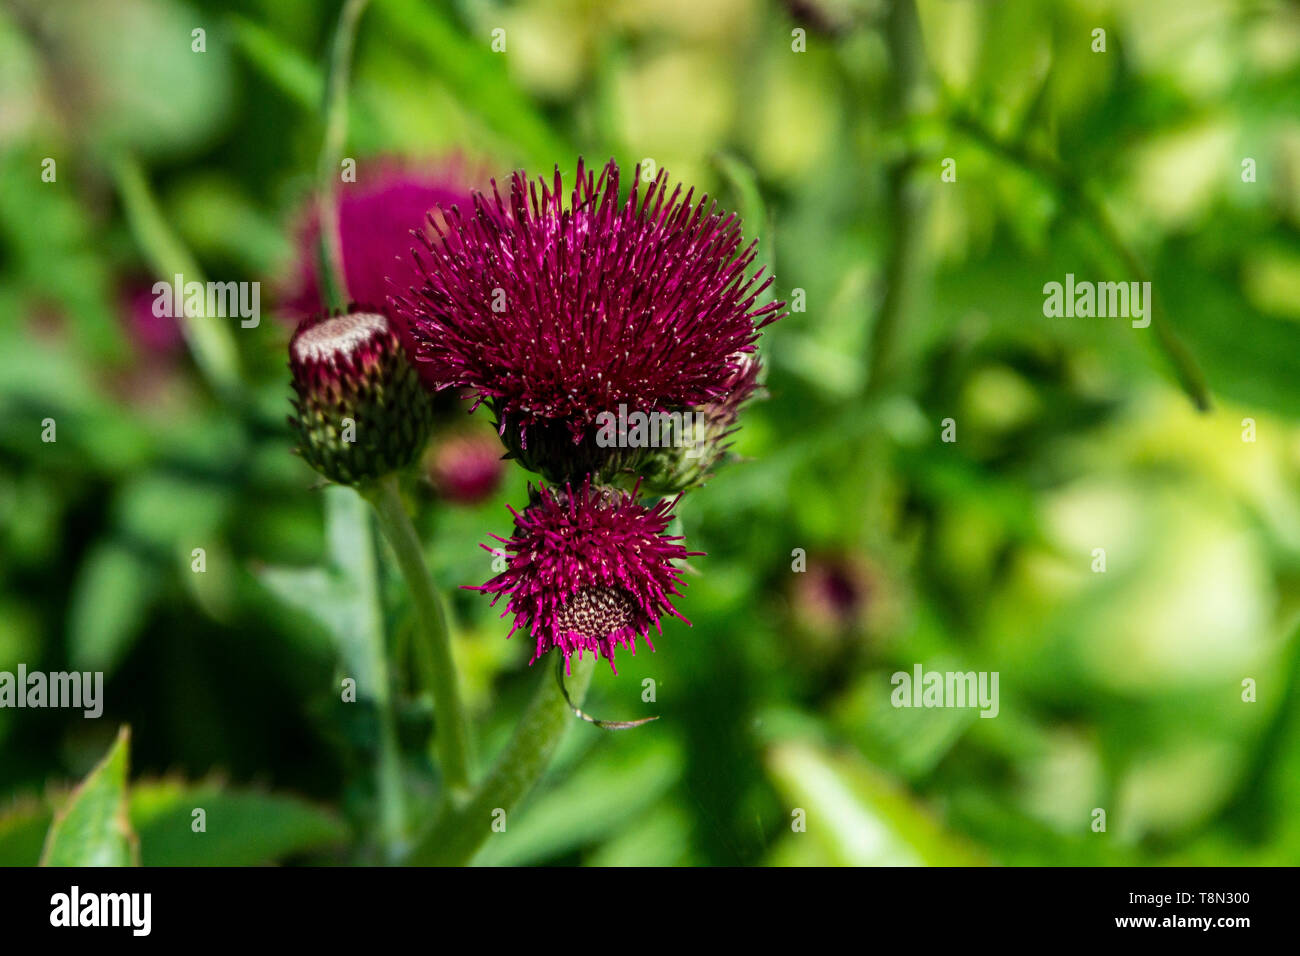 The flowers of a plume thistle (Cirsium) Stock Photo